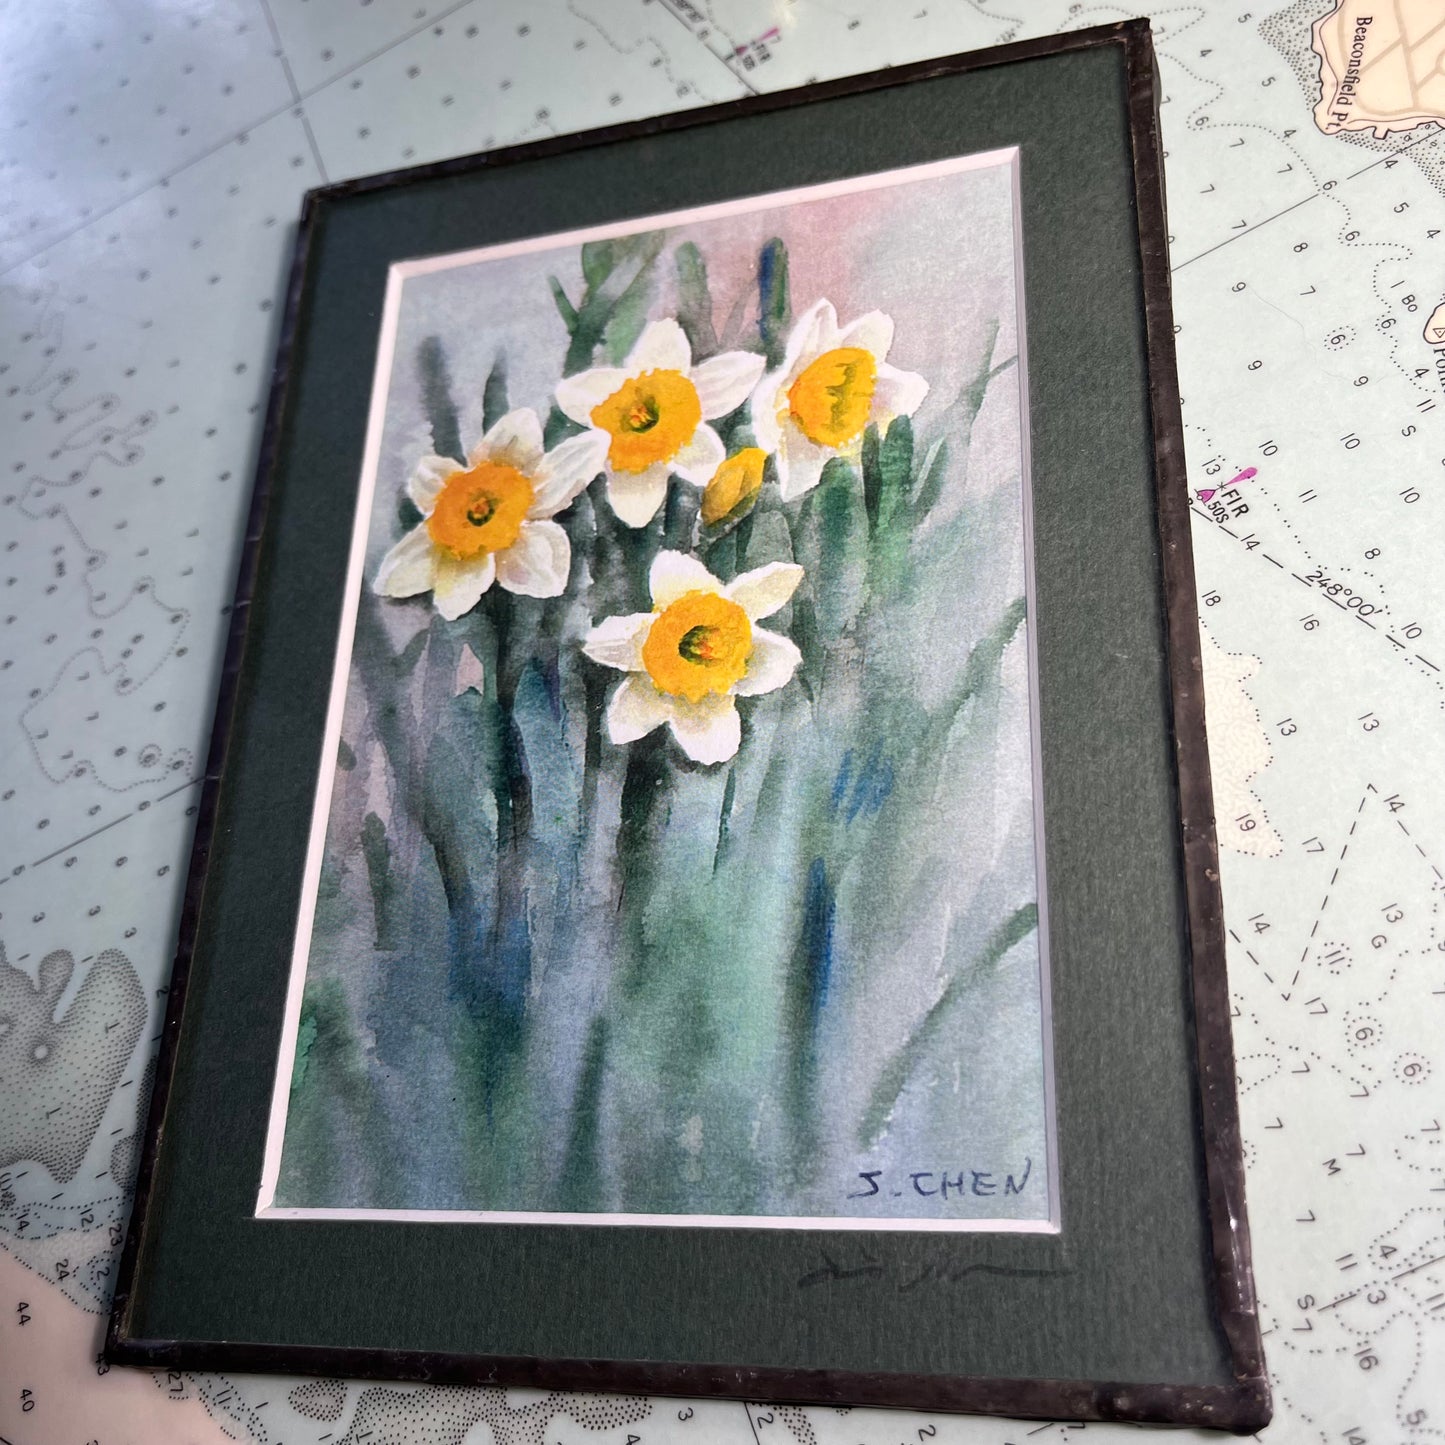 Small Daffodil Watercolour with Leaded Glass Frame by J.Chen